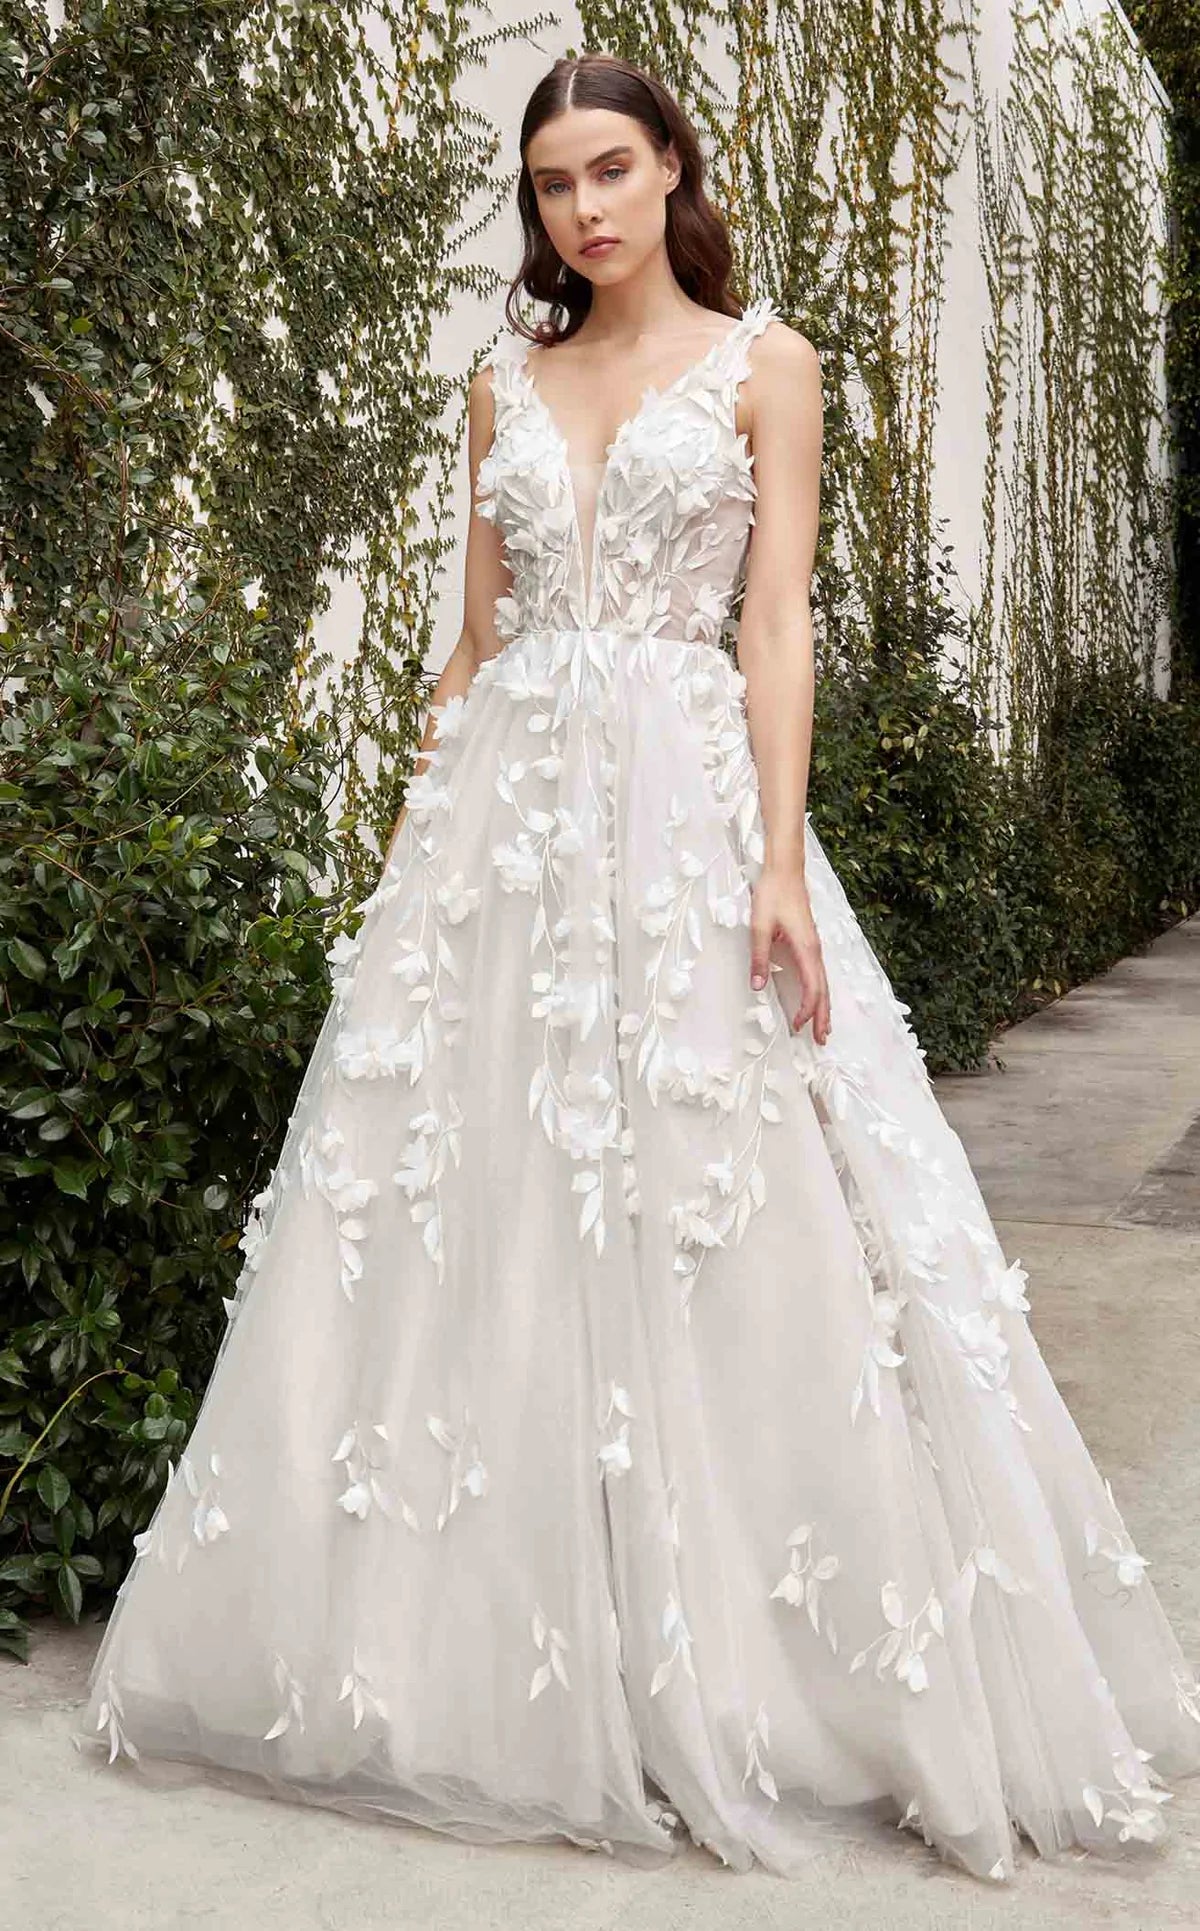 Liza Floral Applique Wedding Dress: Off White - Bella and Bloom Boutique